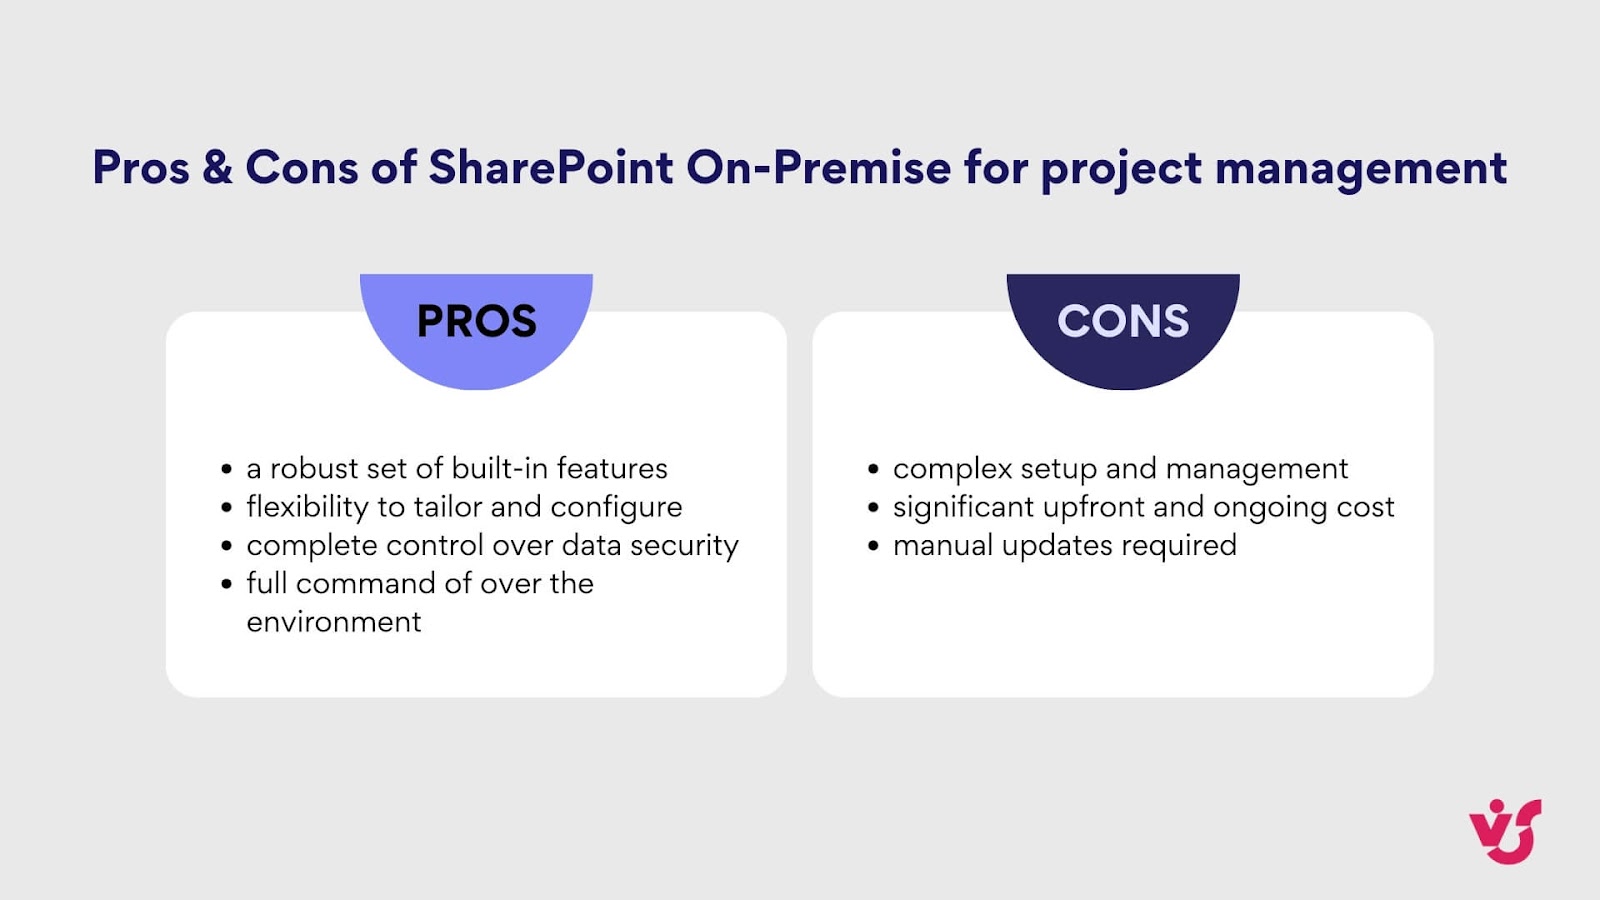 Pros & Cons of SharePoint On-Premise for project management